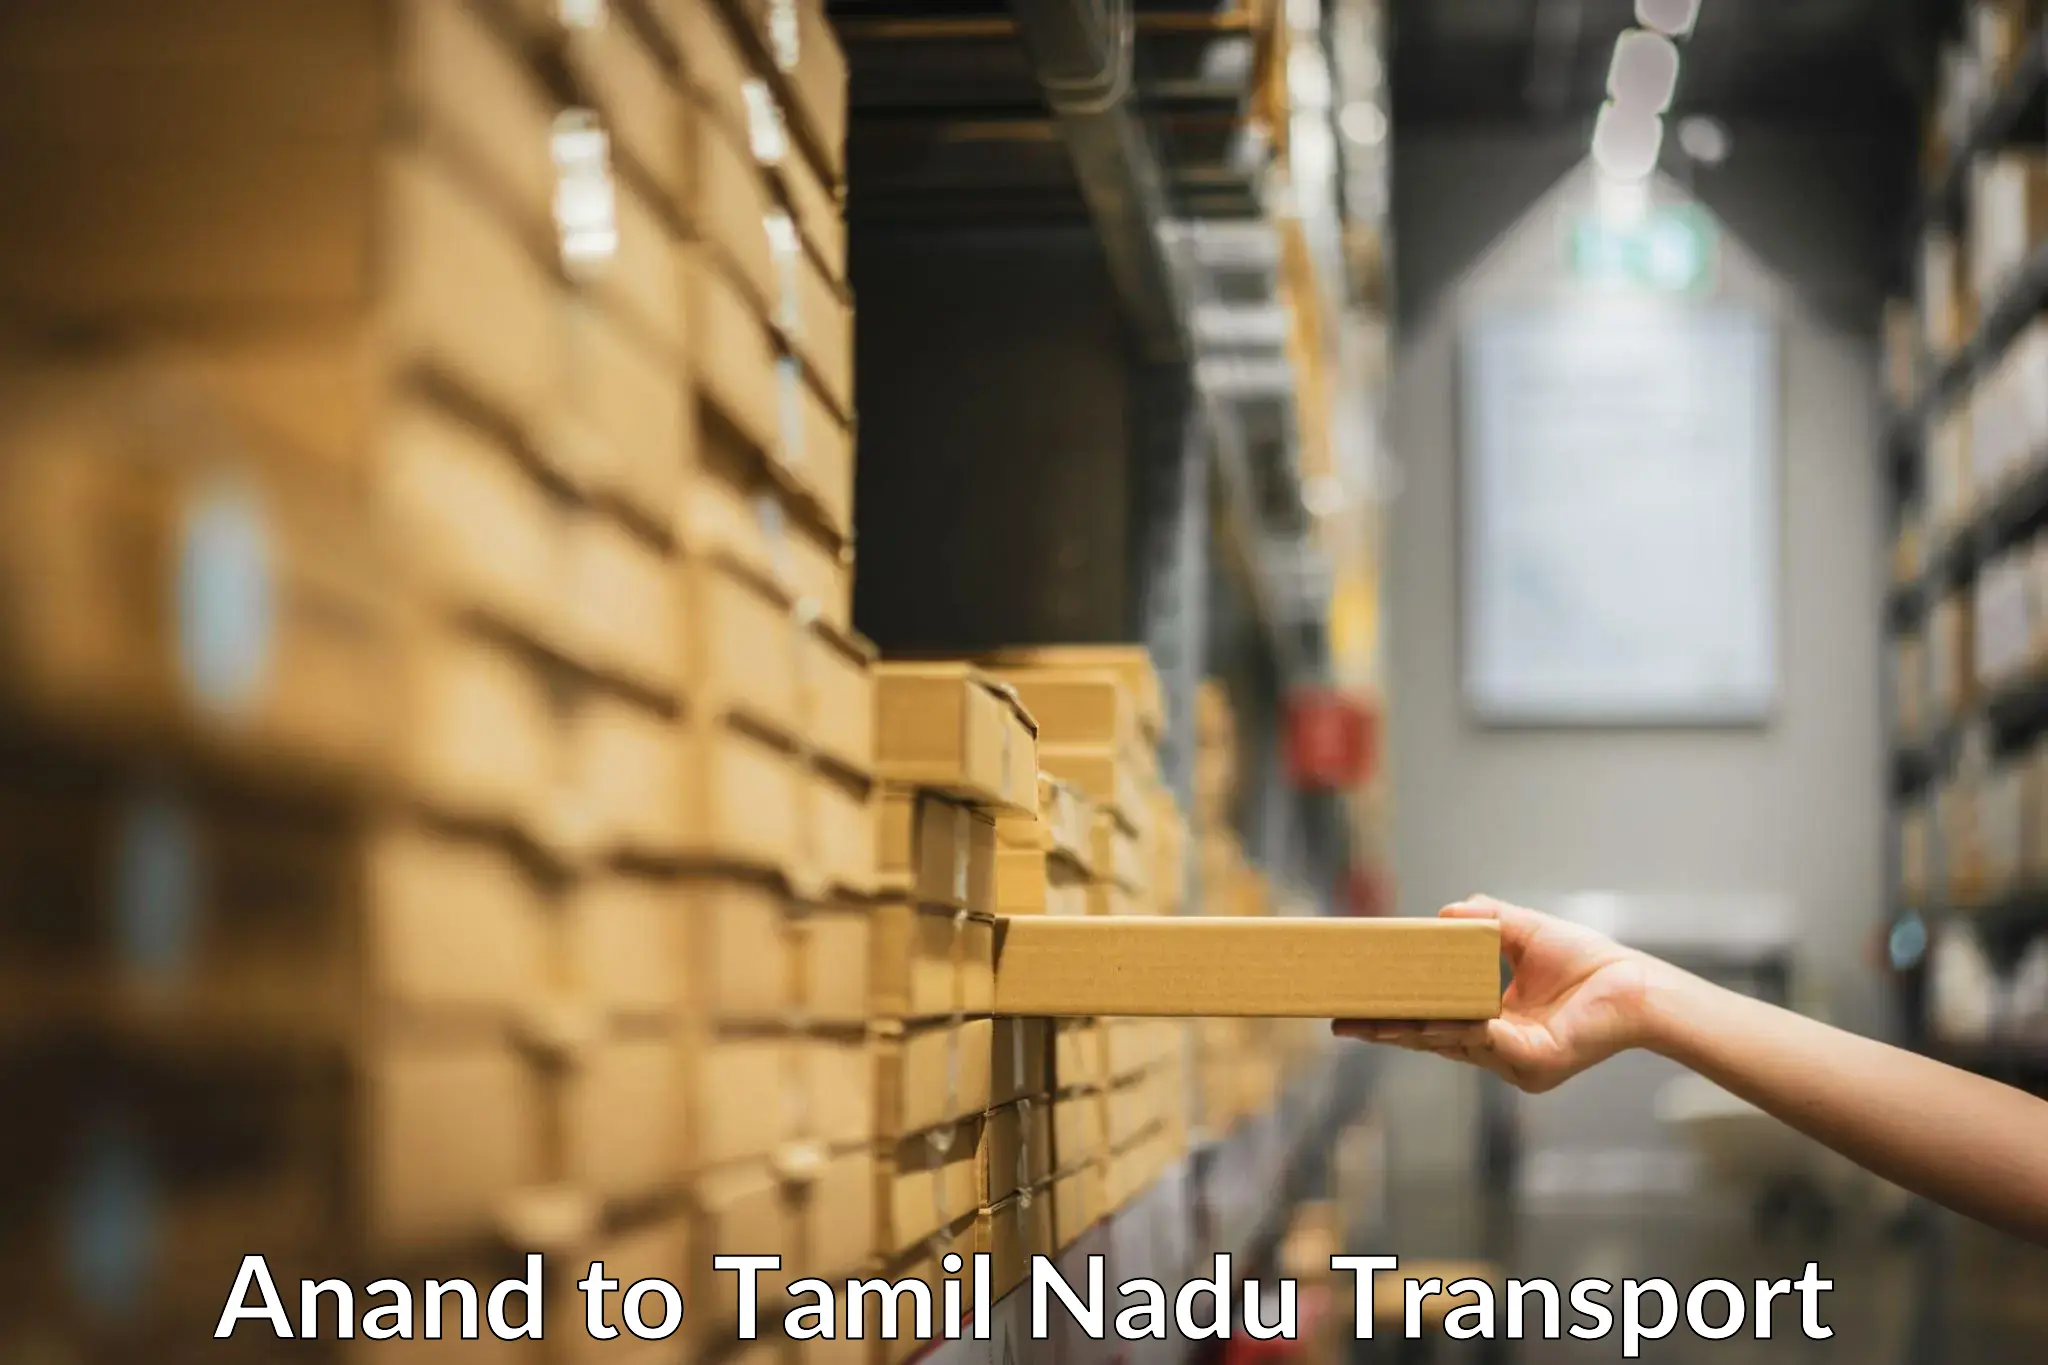 Furniture transport service Anand to Chennai Port